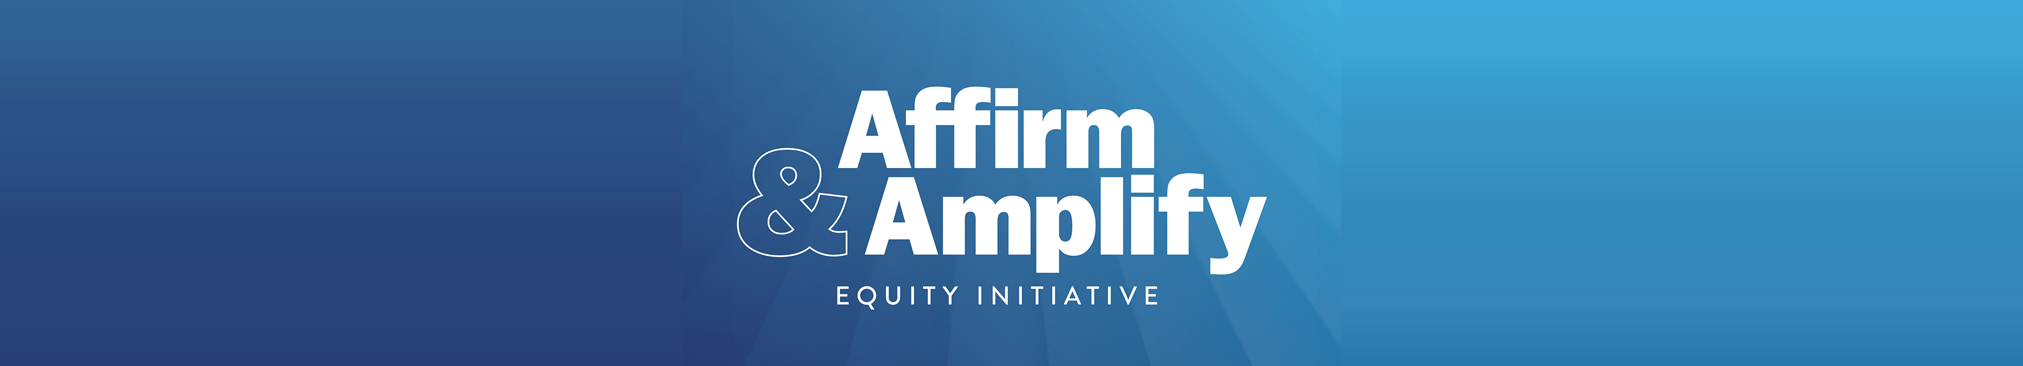 DEI Affirm and Amplify at WXXI